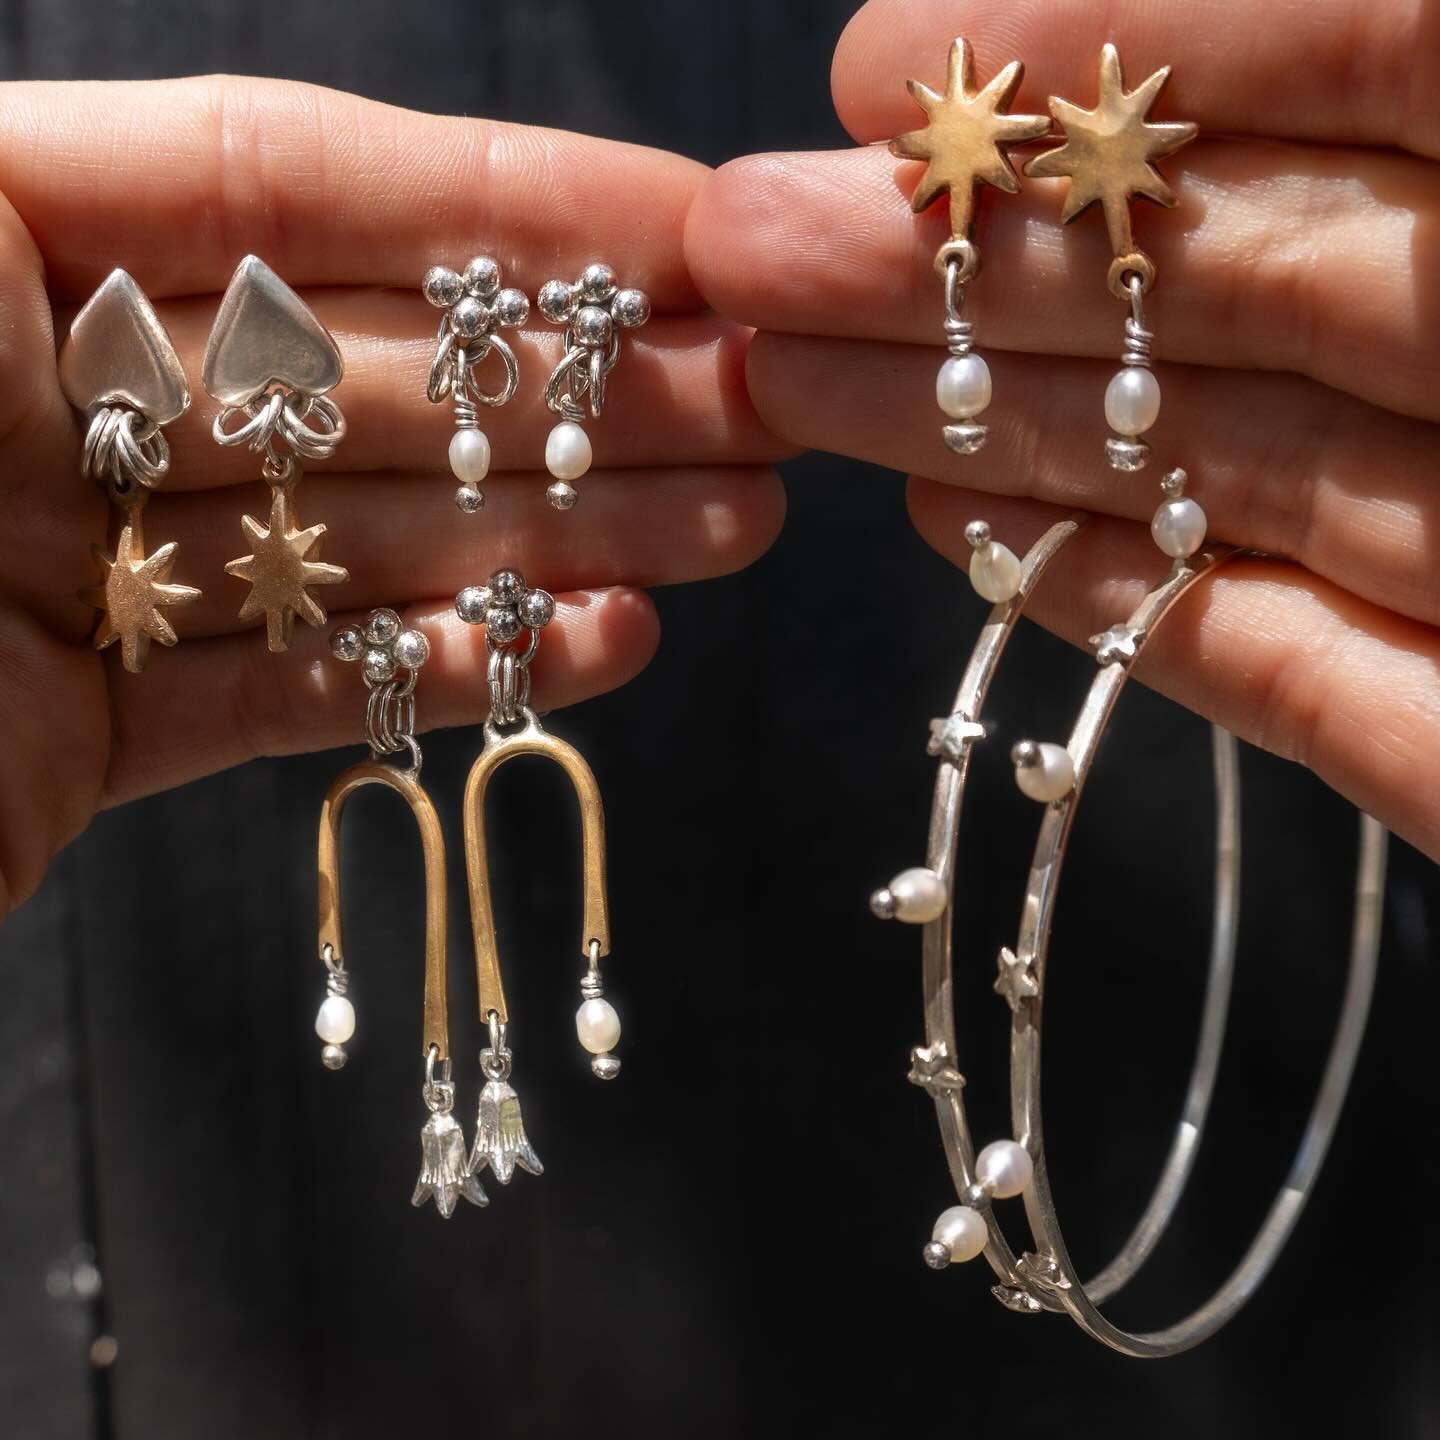 Notions of spring are here - Pearls, fairy bells, mixed metals! So fun playing around with new designs. Which ones are your favorite? 

These all will be available in my next drop coming soon. Turn on post notifications so you will be the first to kn